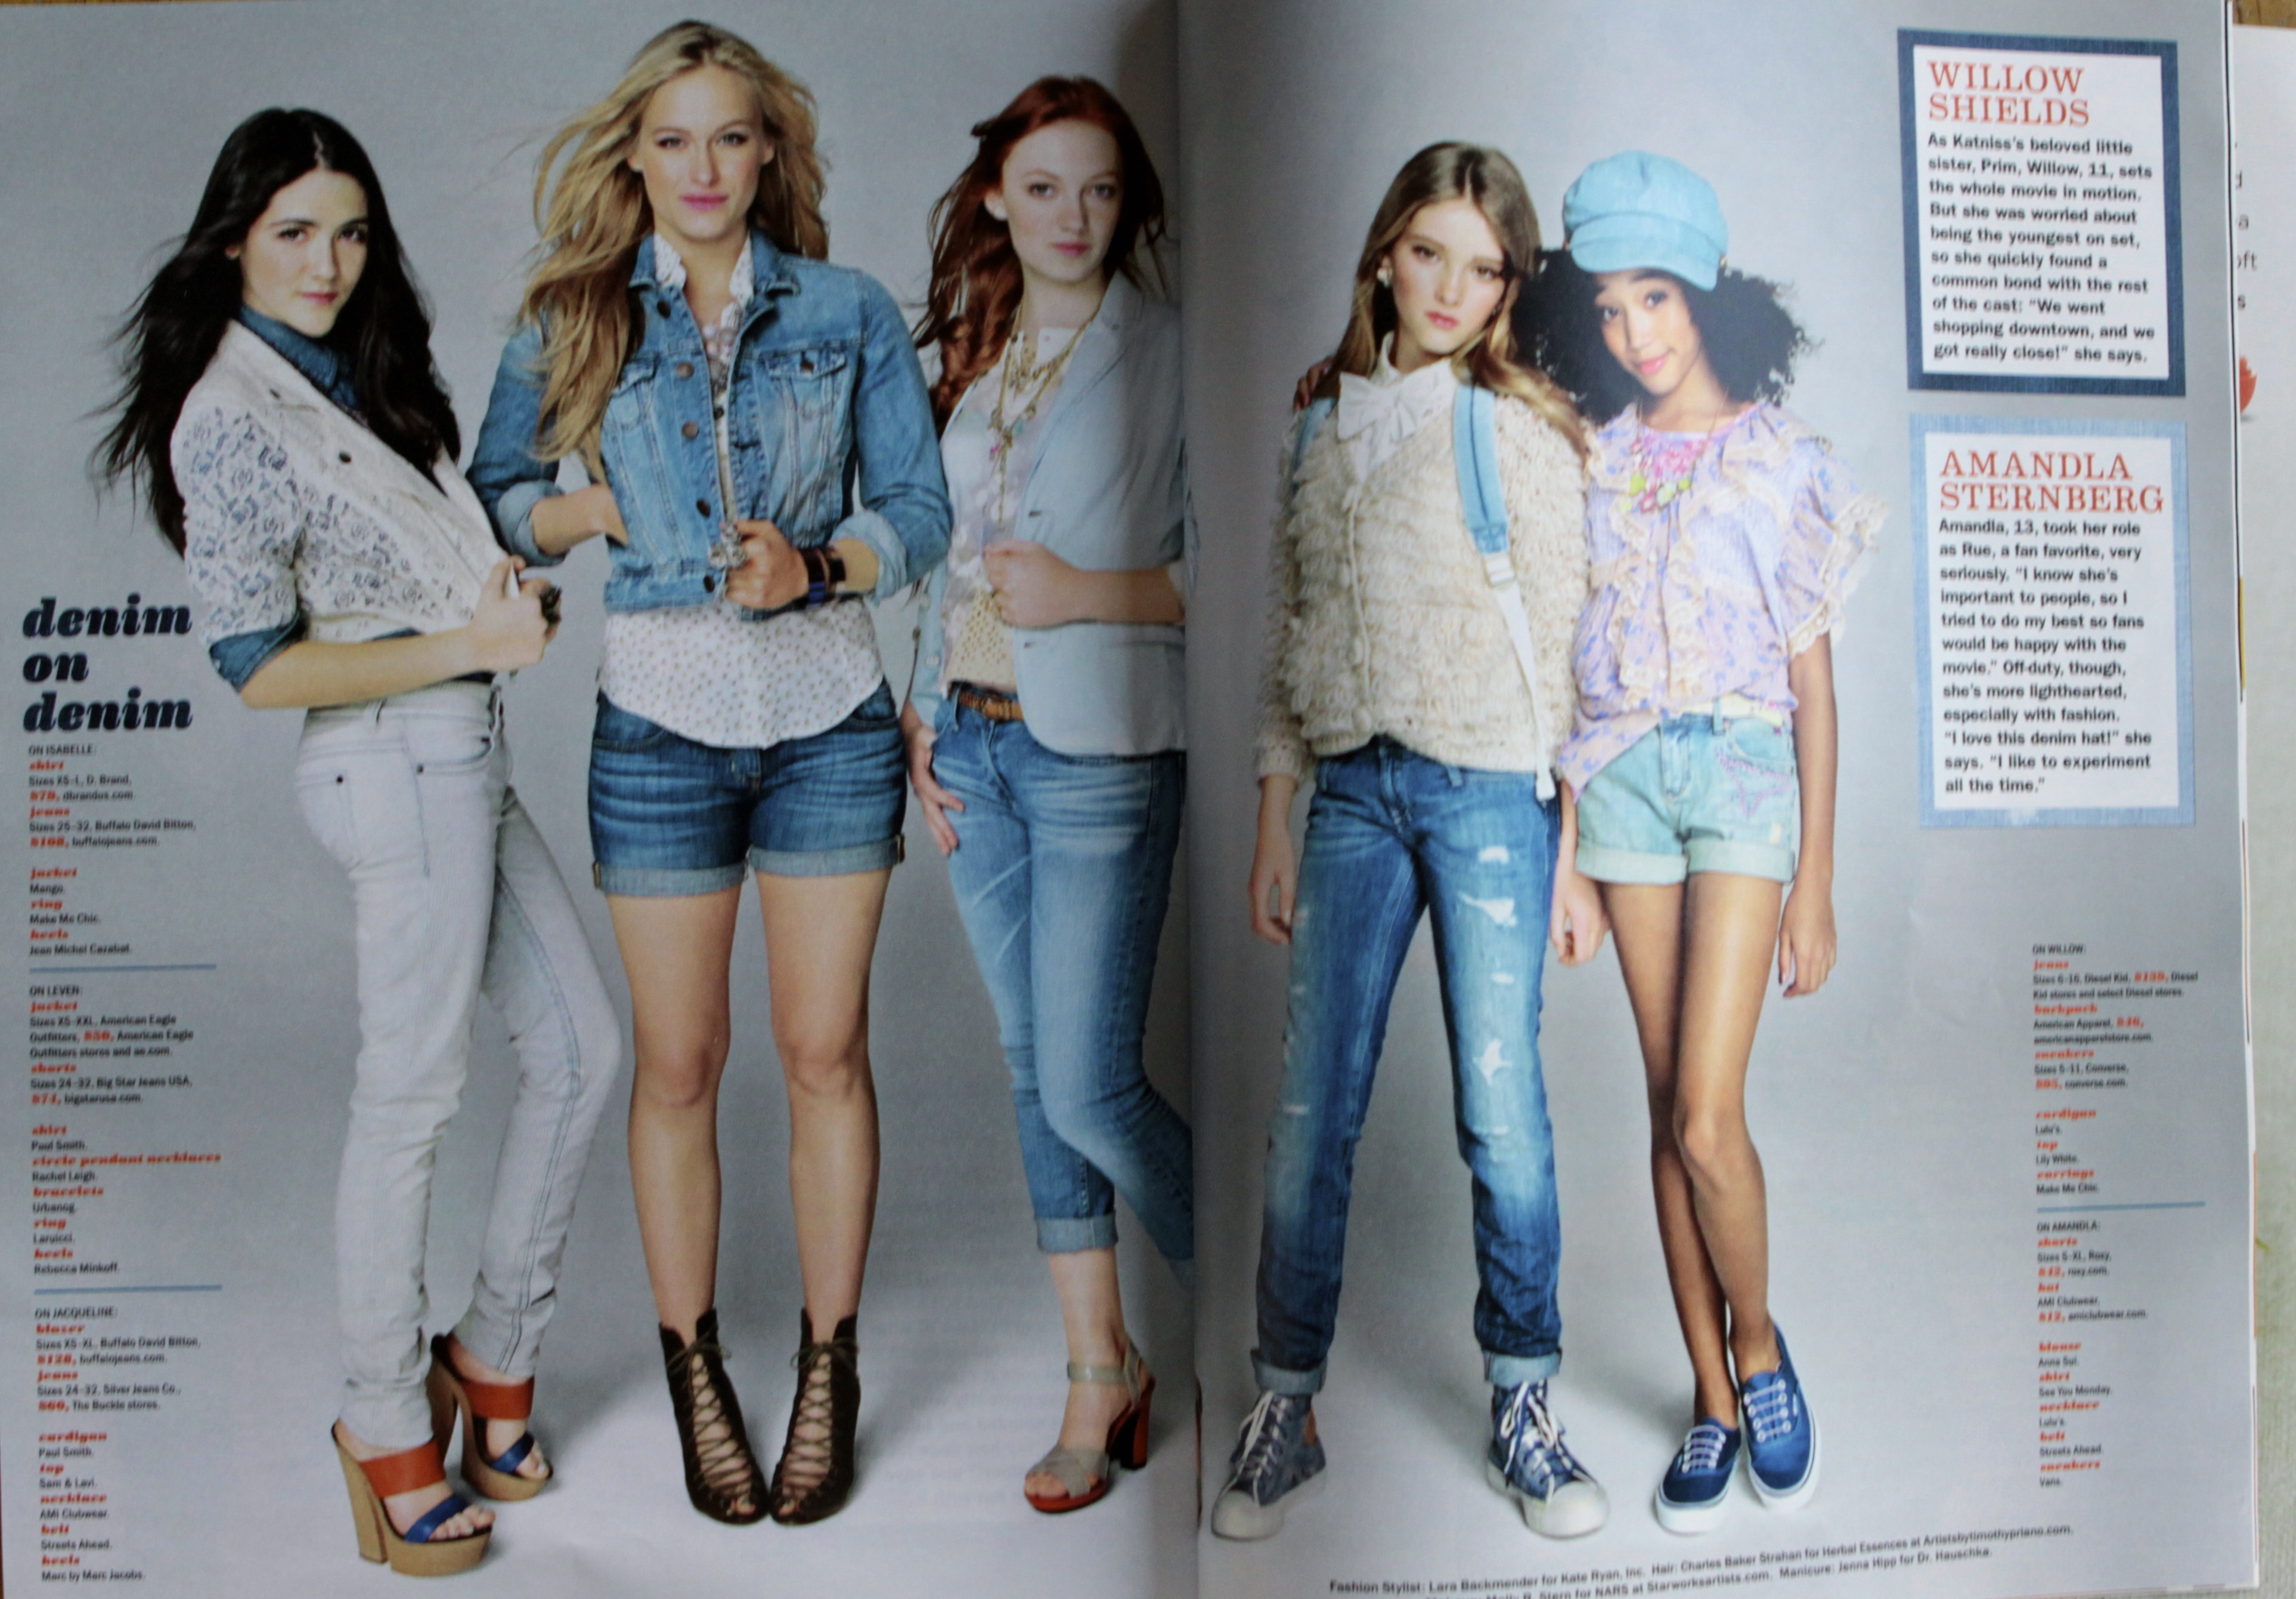 Willow Shields and The Hunger Games cast in Seventeen Magazine